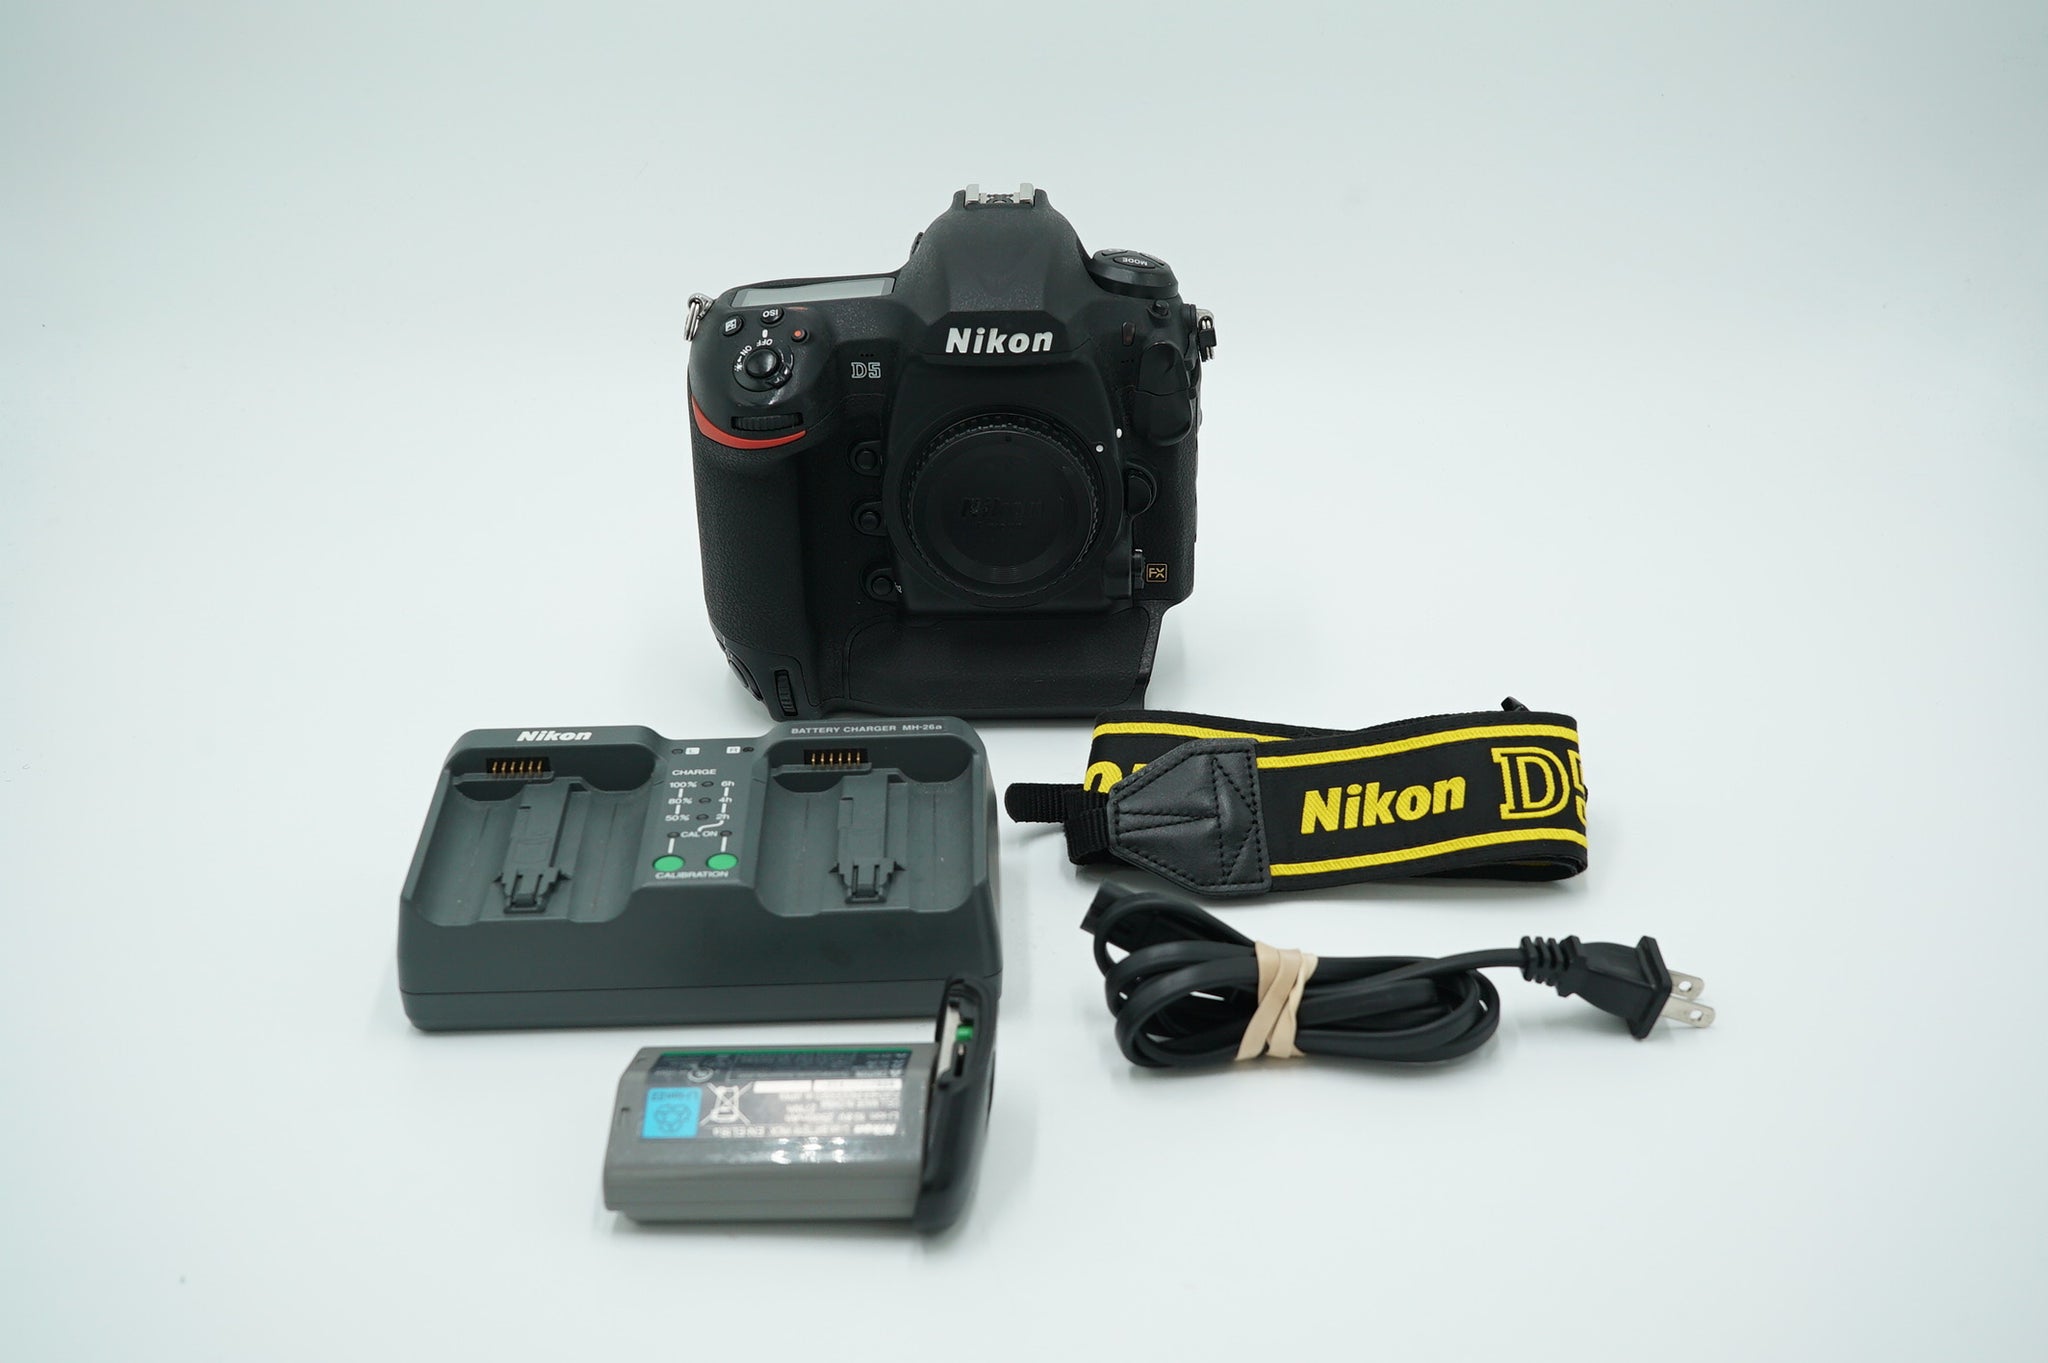 Nikon D5/11559 D5 Body Only, Used